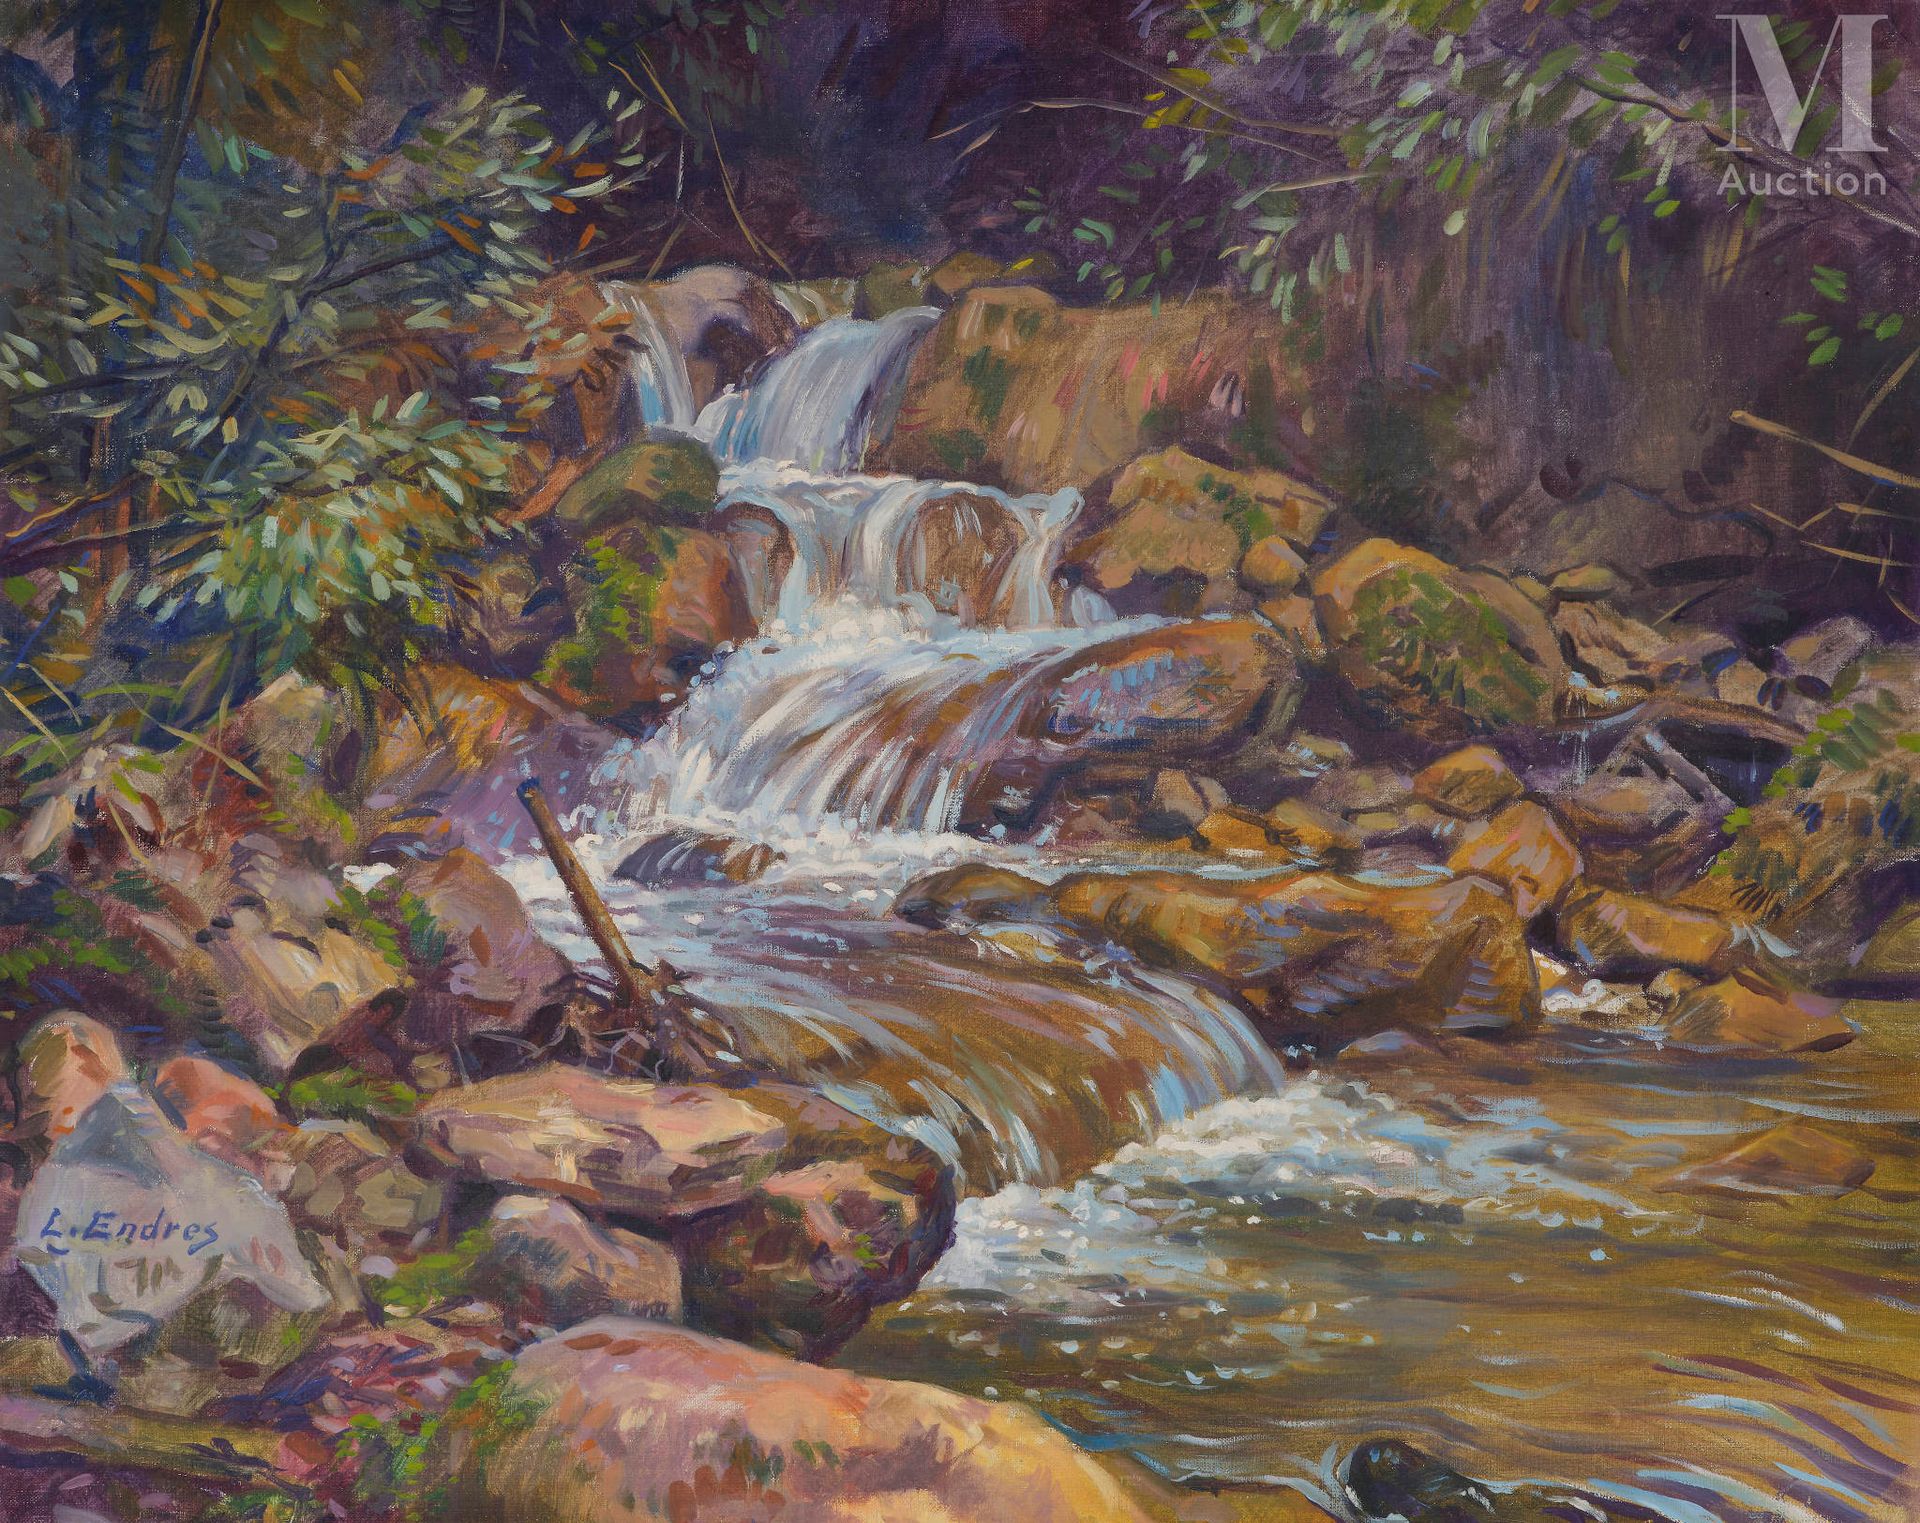 Louis ENDRES (1896 - 1986) The waterfall

Oil on canvas 

40 x 50 cm 

Signed lo&hellip;